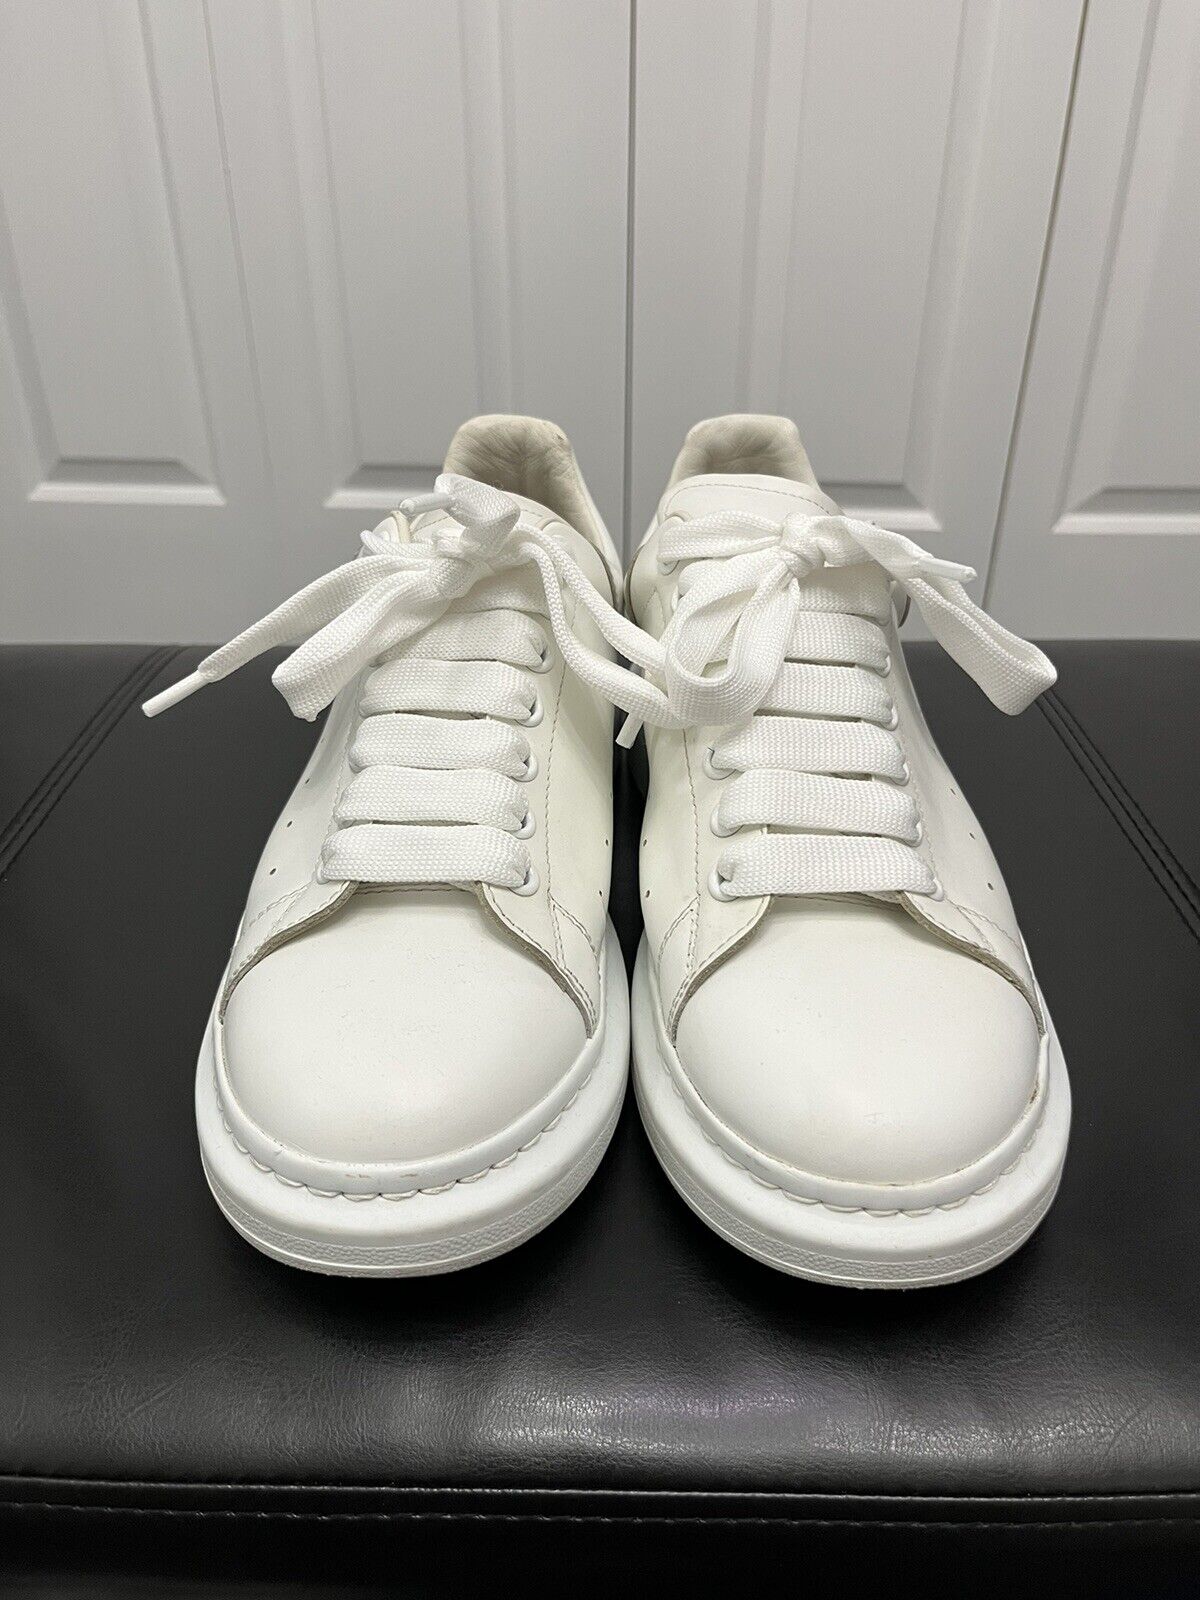 Alexander McQueen Men\'s Oversized Leather Sneakers All white - Size 9.5 / 42.5